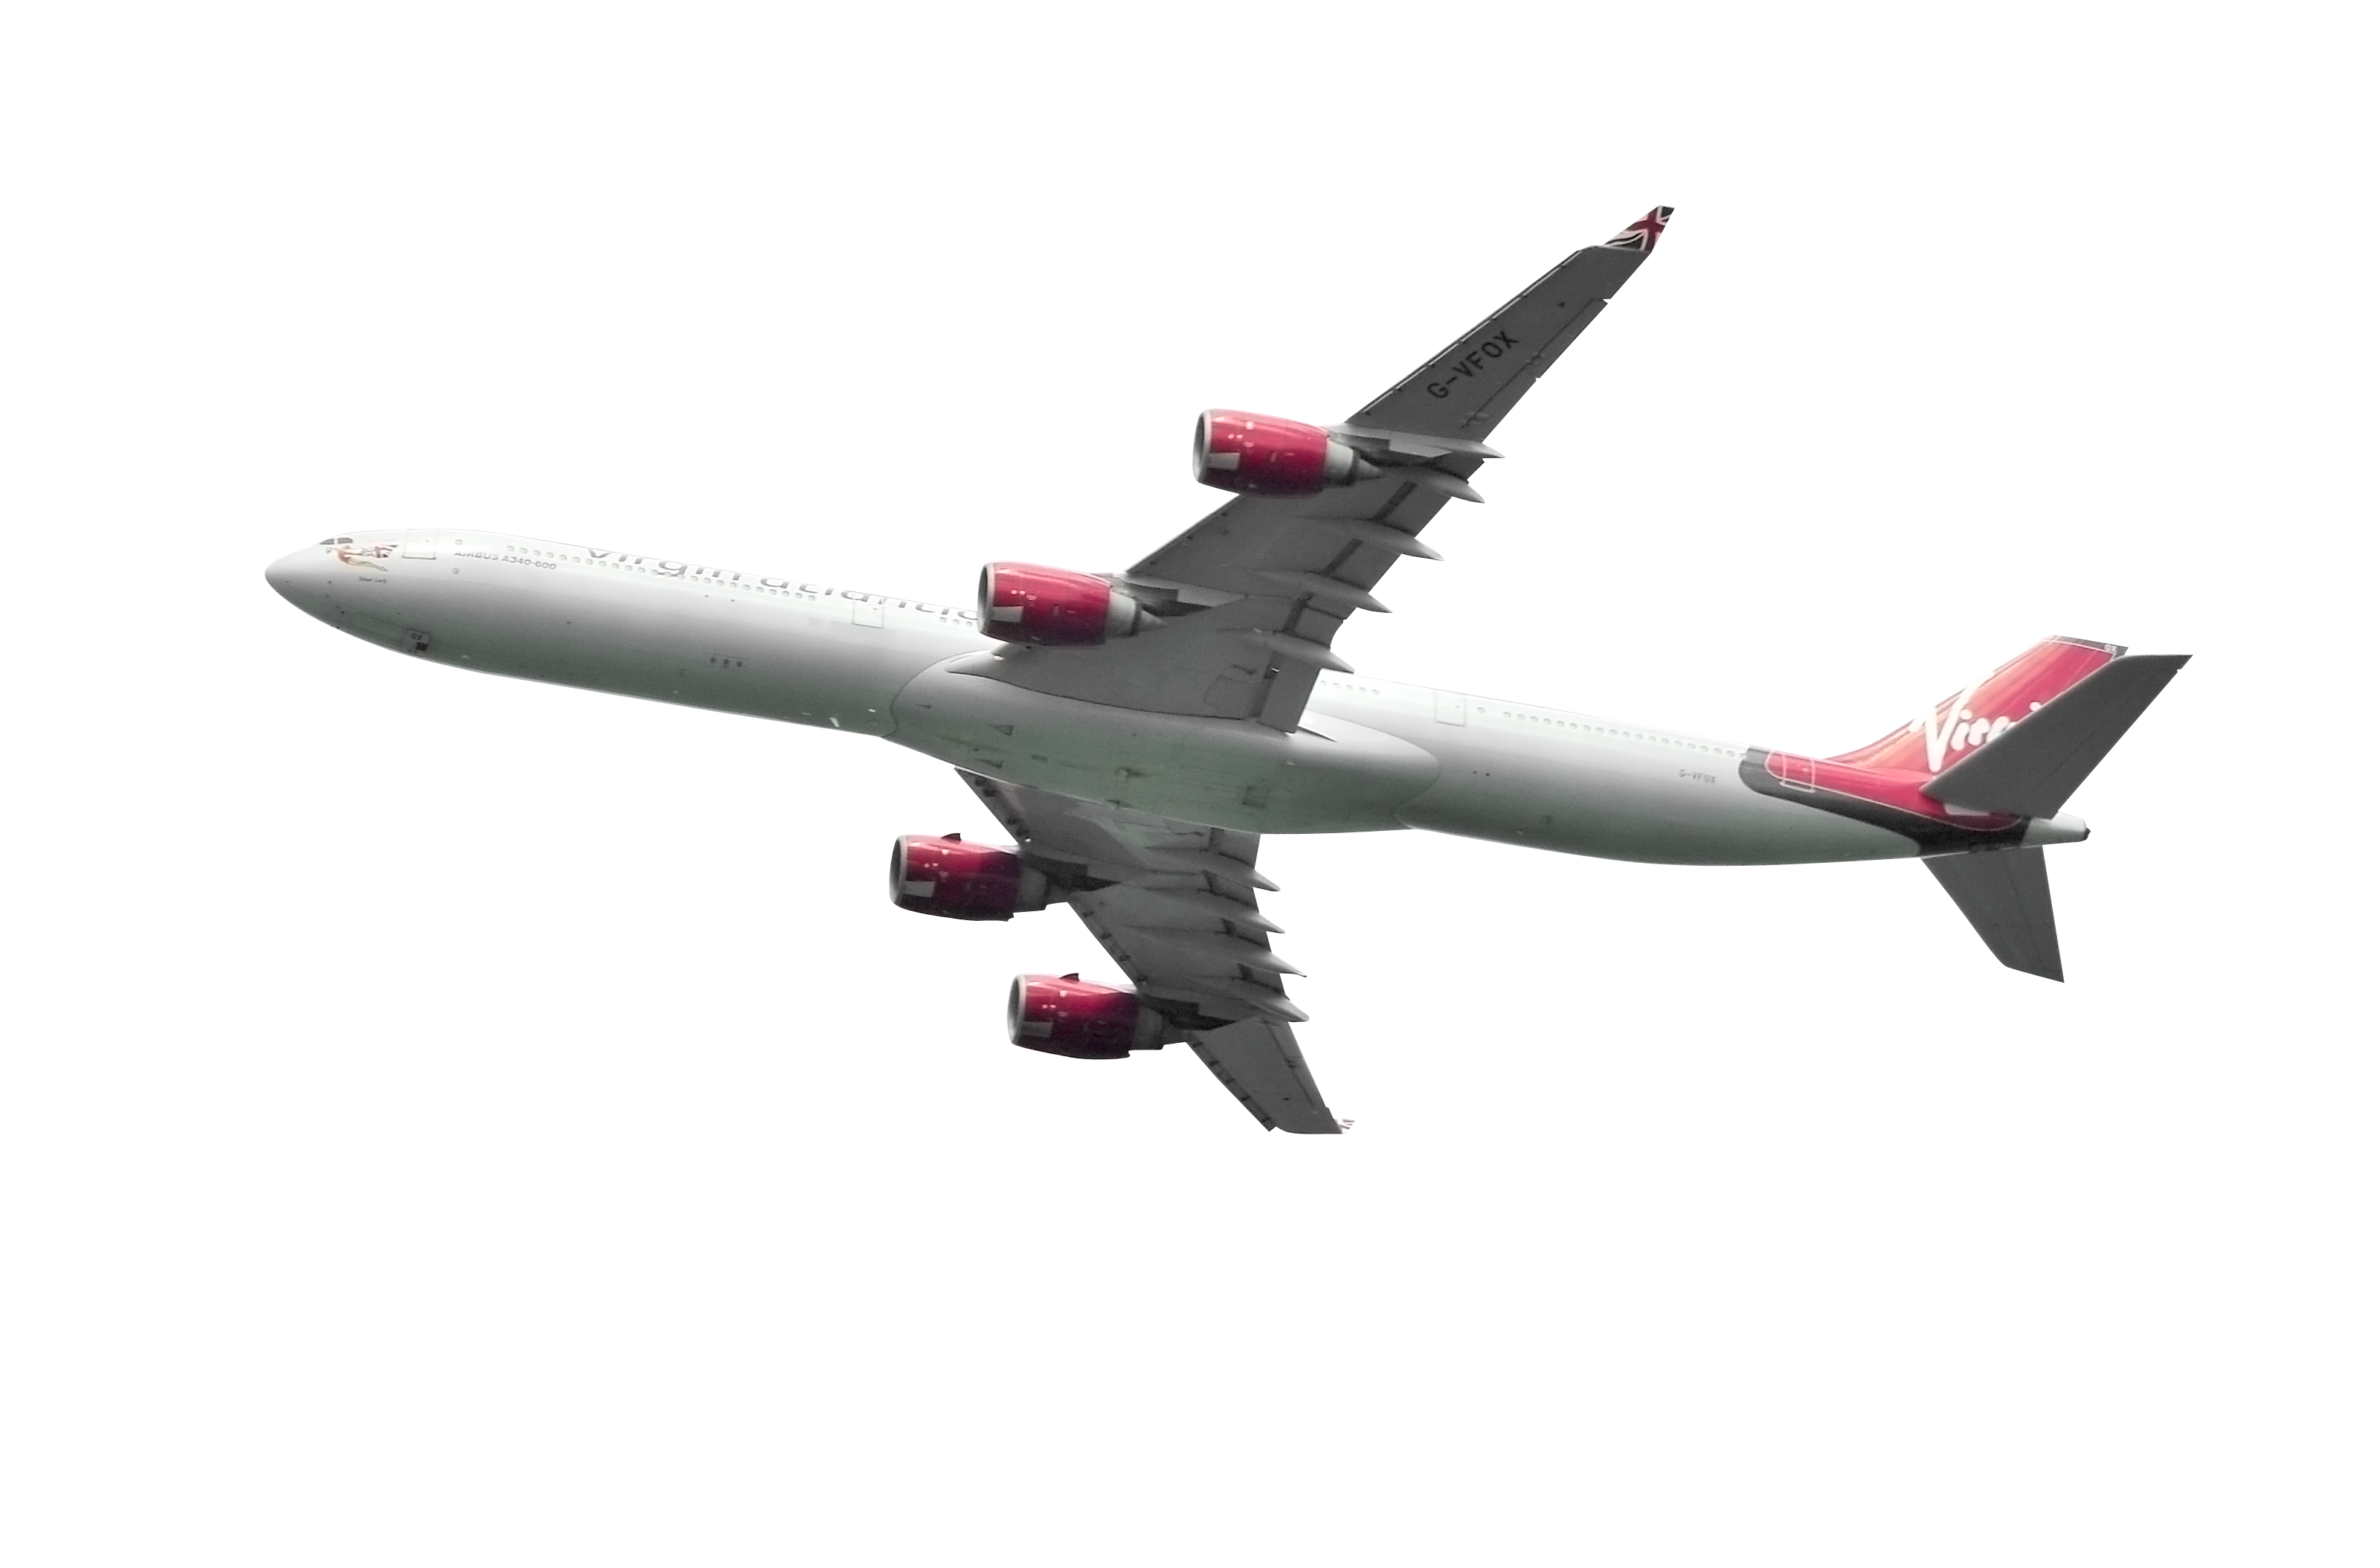 Planes PNG images free download, plane PNG photo.